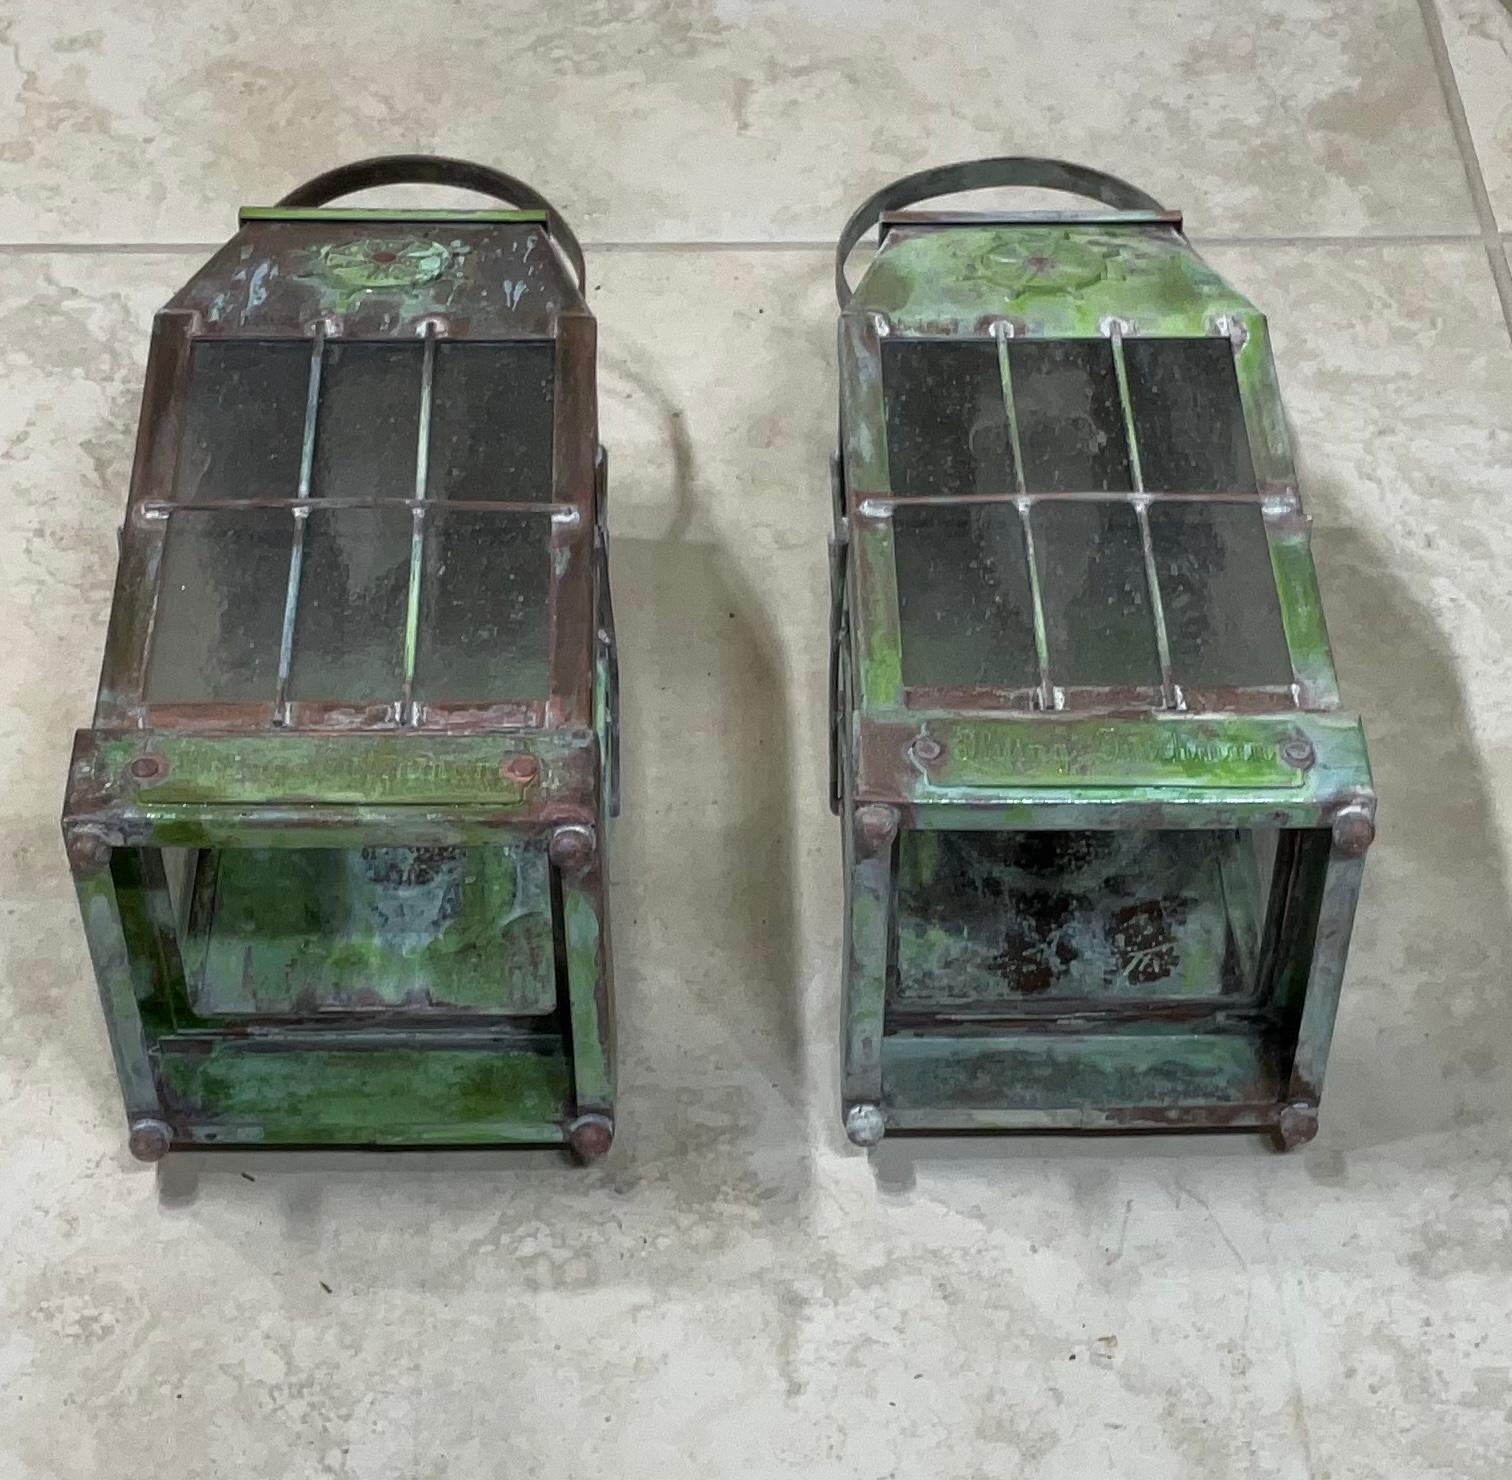 Beautiful pair of wall lantern made of solid brass, exceptional quality workmanship, electrified with one 60/watt light each, seeded glass.
Protective decorative bars, very nice patina.
Suitable for wet location.
Will look good in beach house,